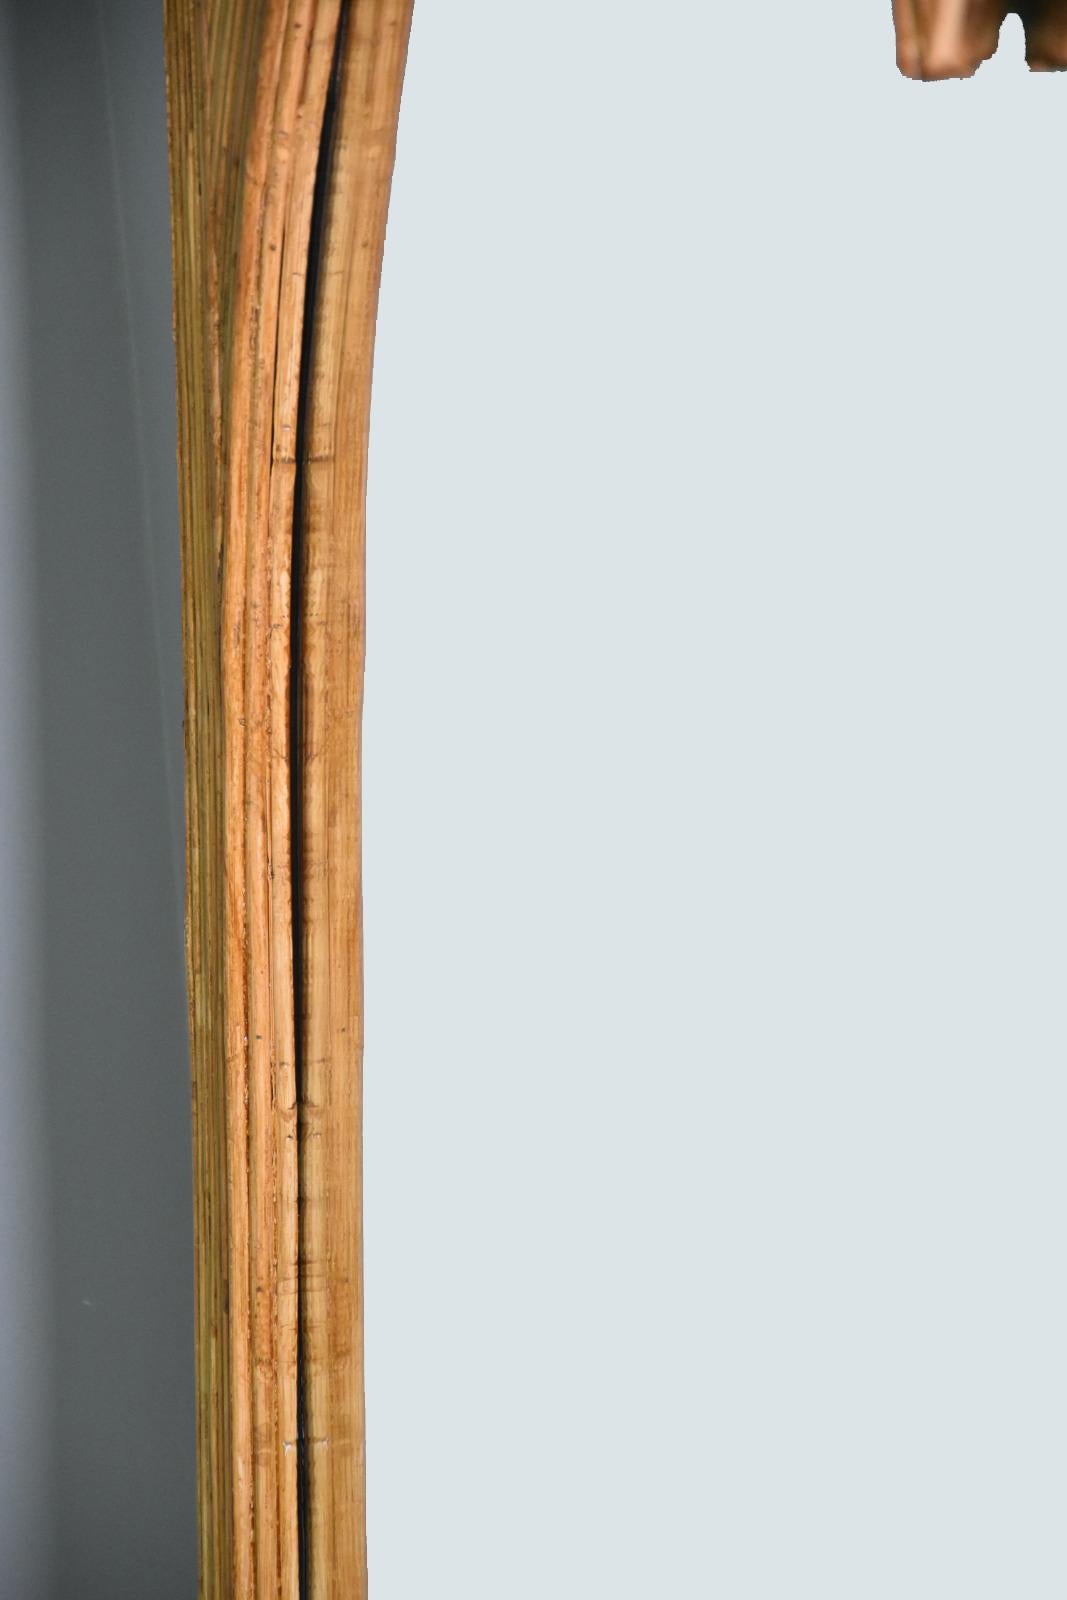 Rare Pair Large Rattan Bamboo Mirror by Vivai del Sud Roma, 1970s For Sale 1